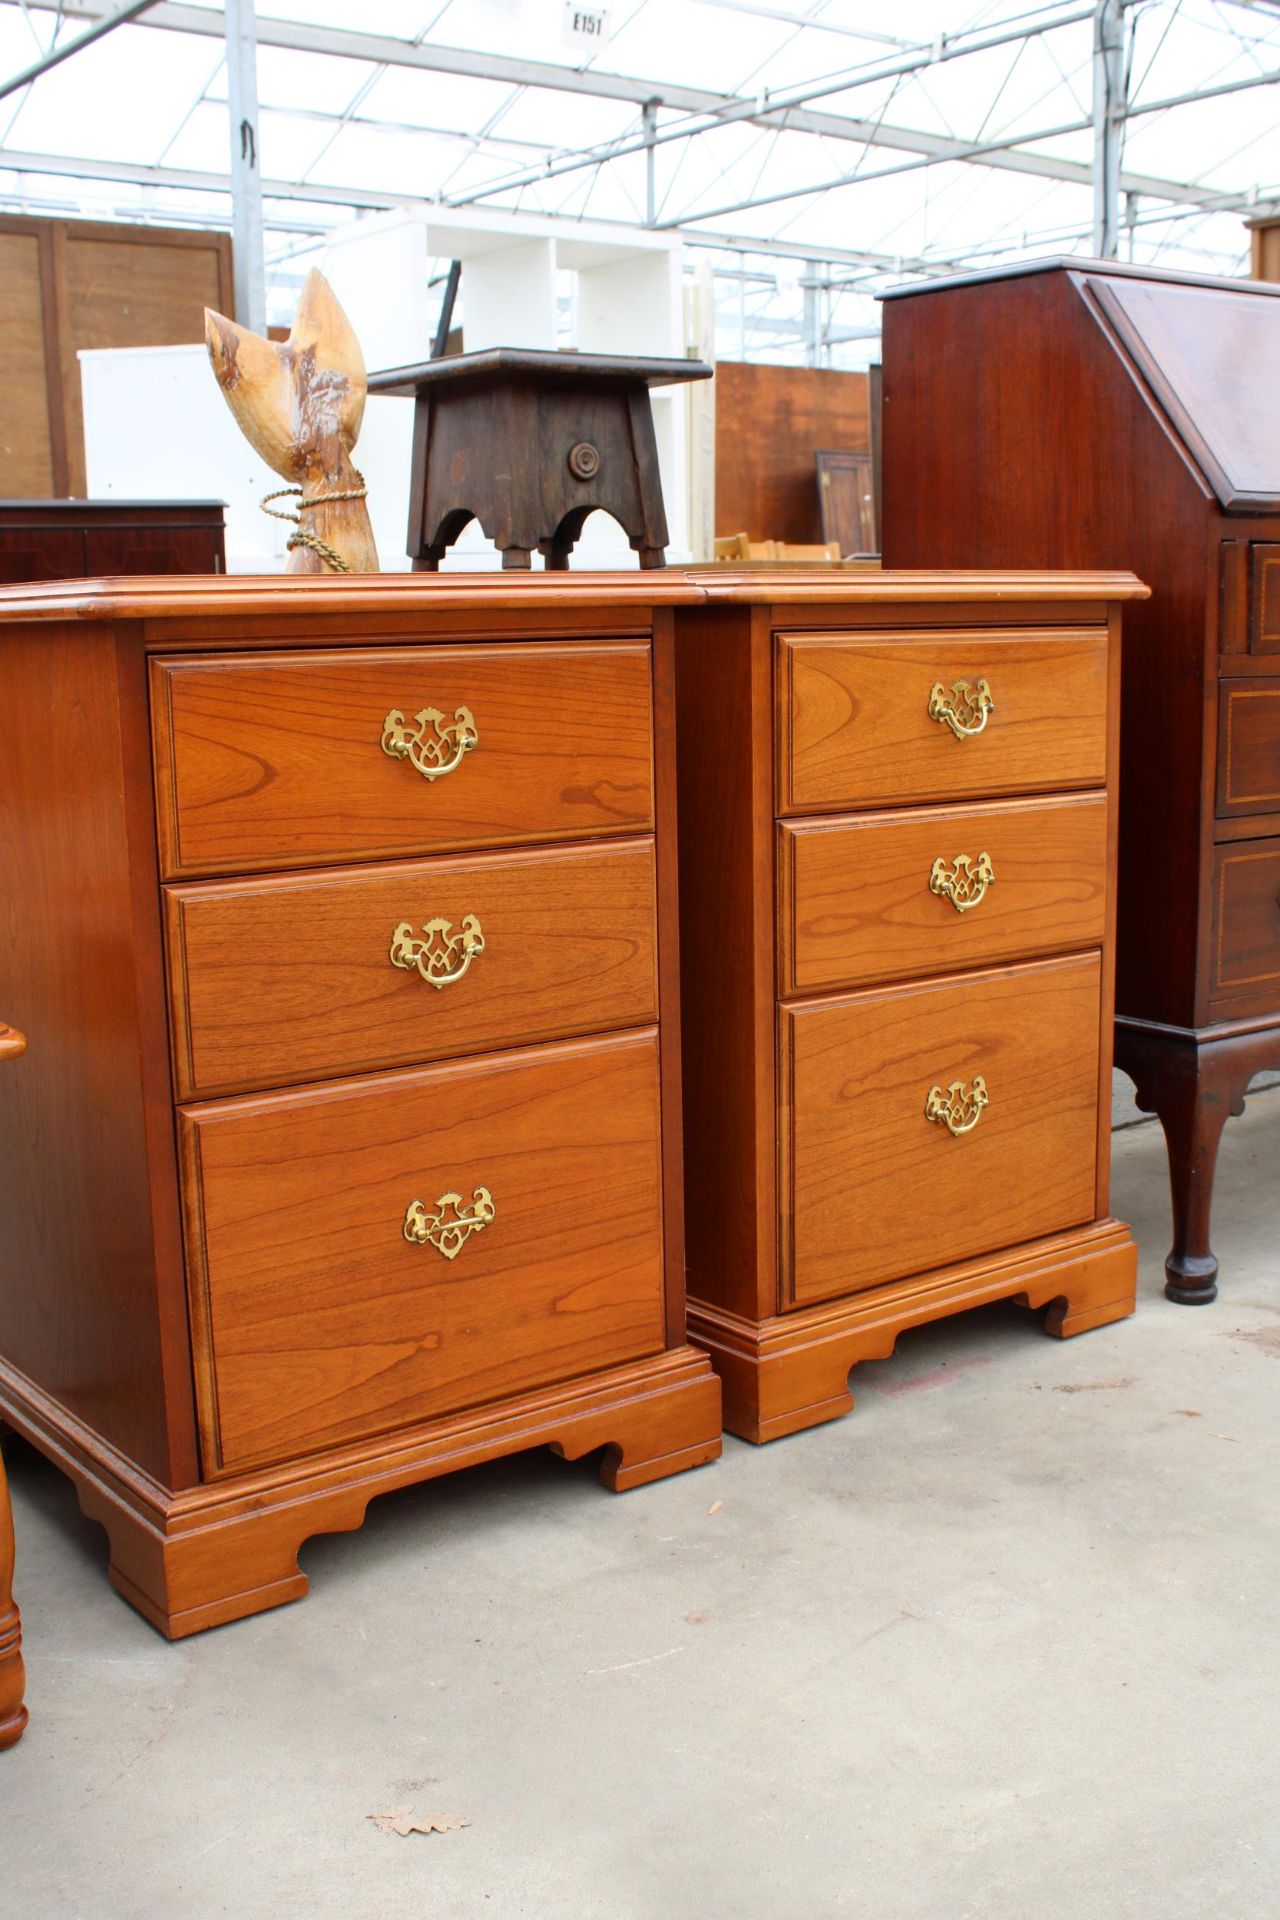 A PAIR OF YOUNGER FURNITURE BEDSIDE CHESTS OF 3 DRAWERS ON BRACKET FEET - Image 2 of 5